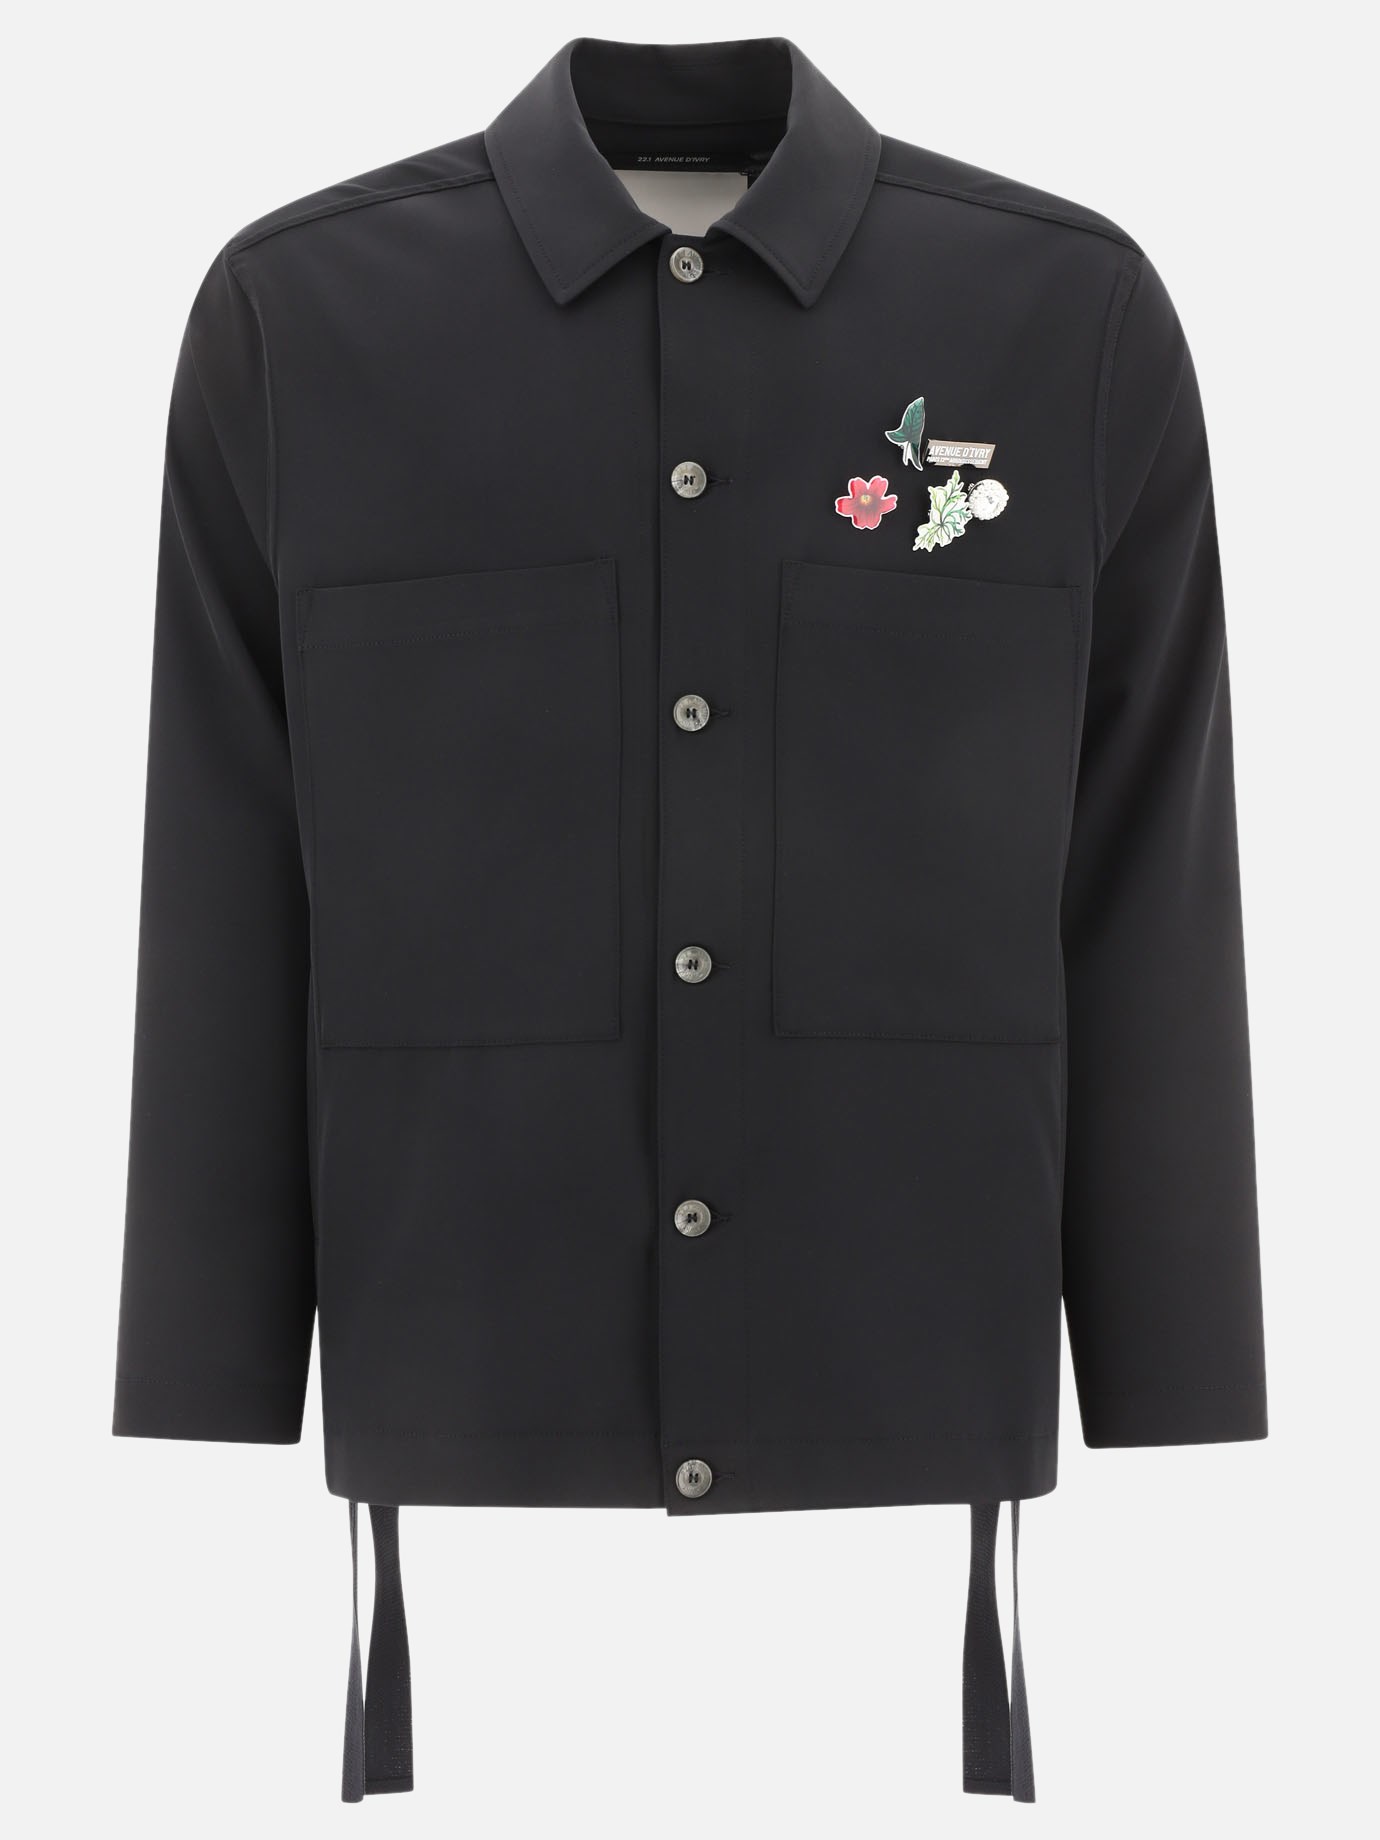 Overshirt with pins